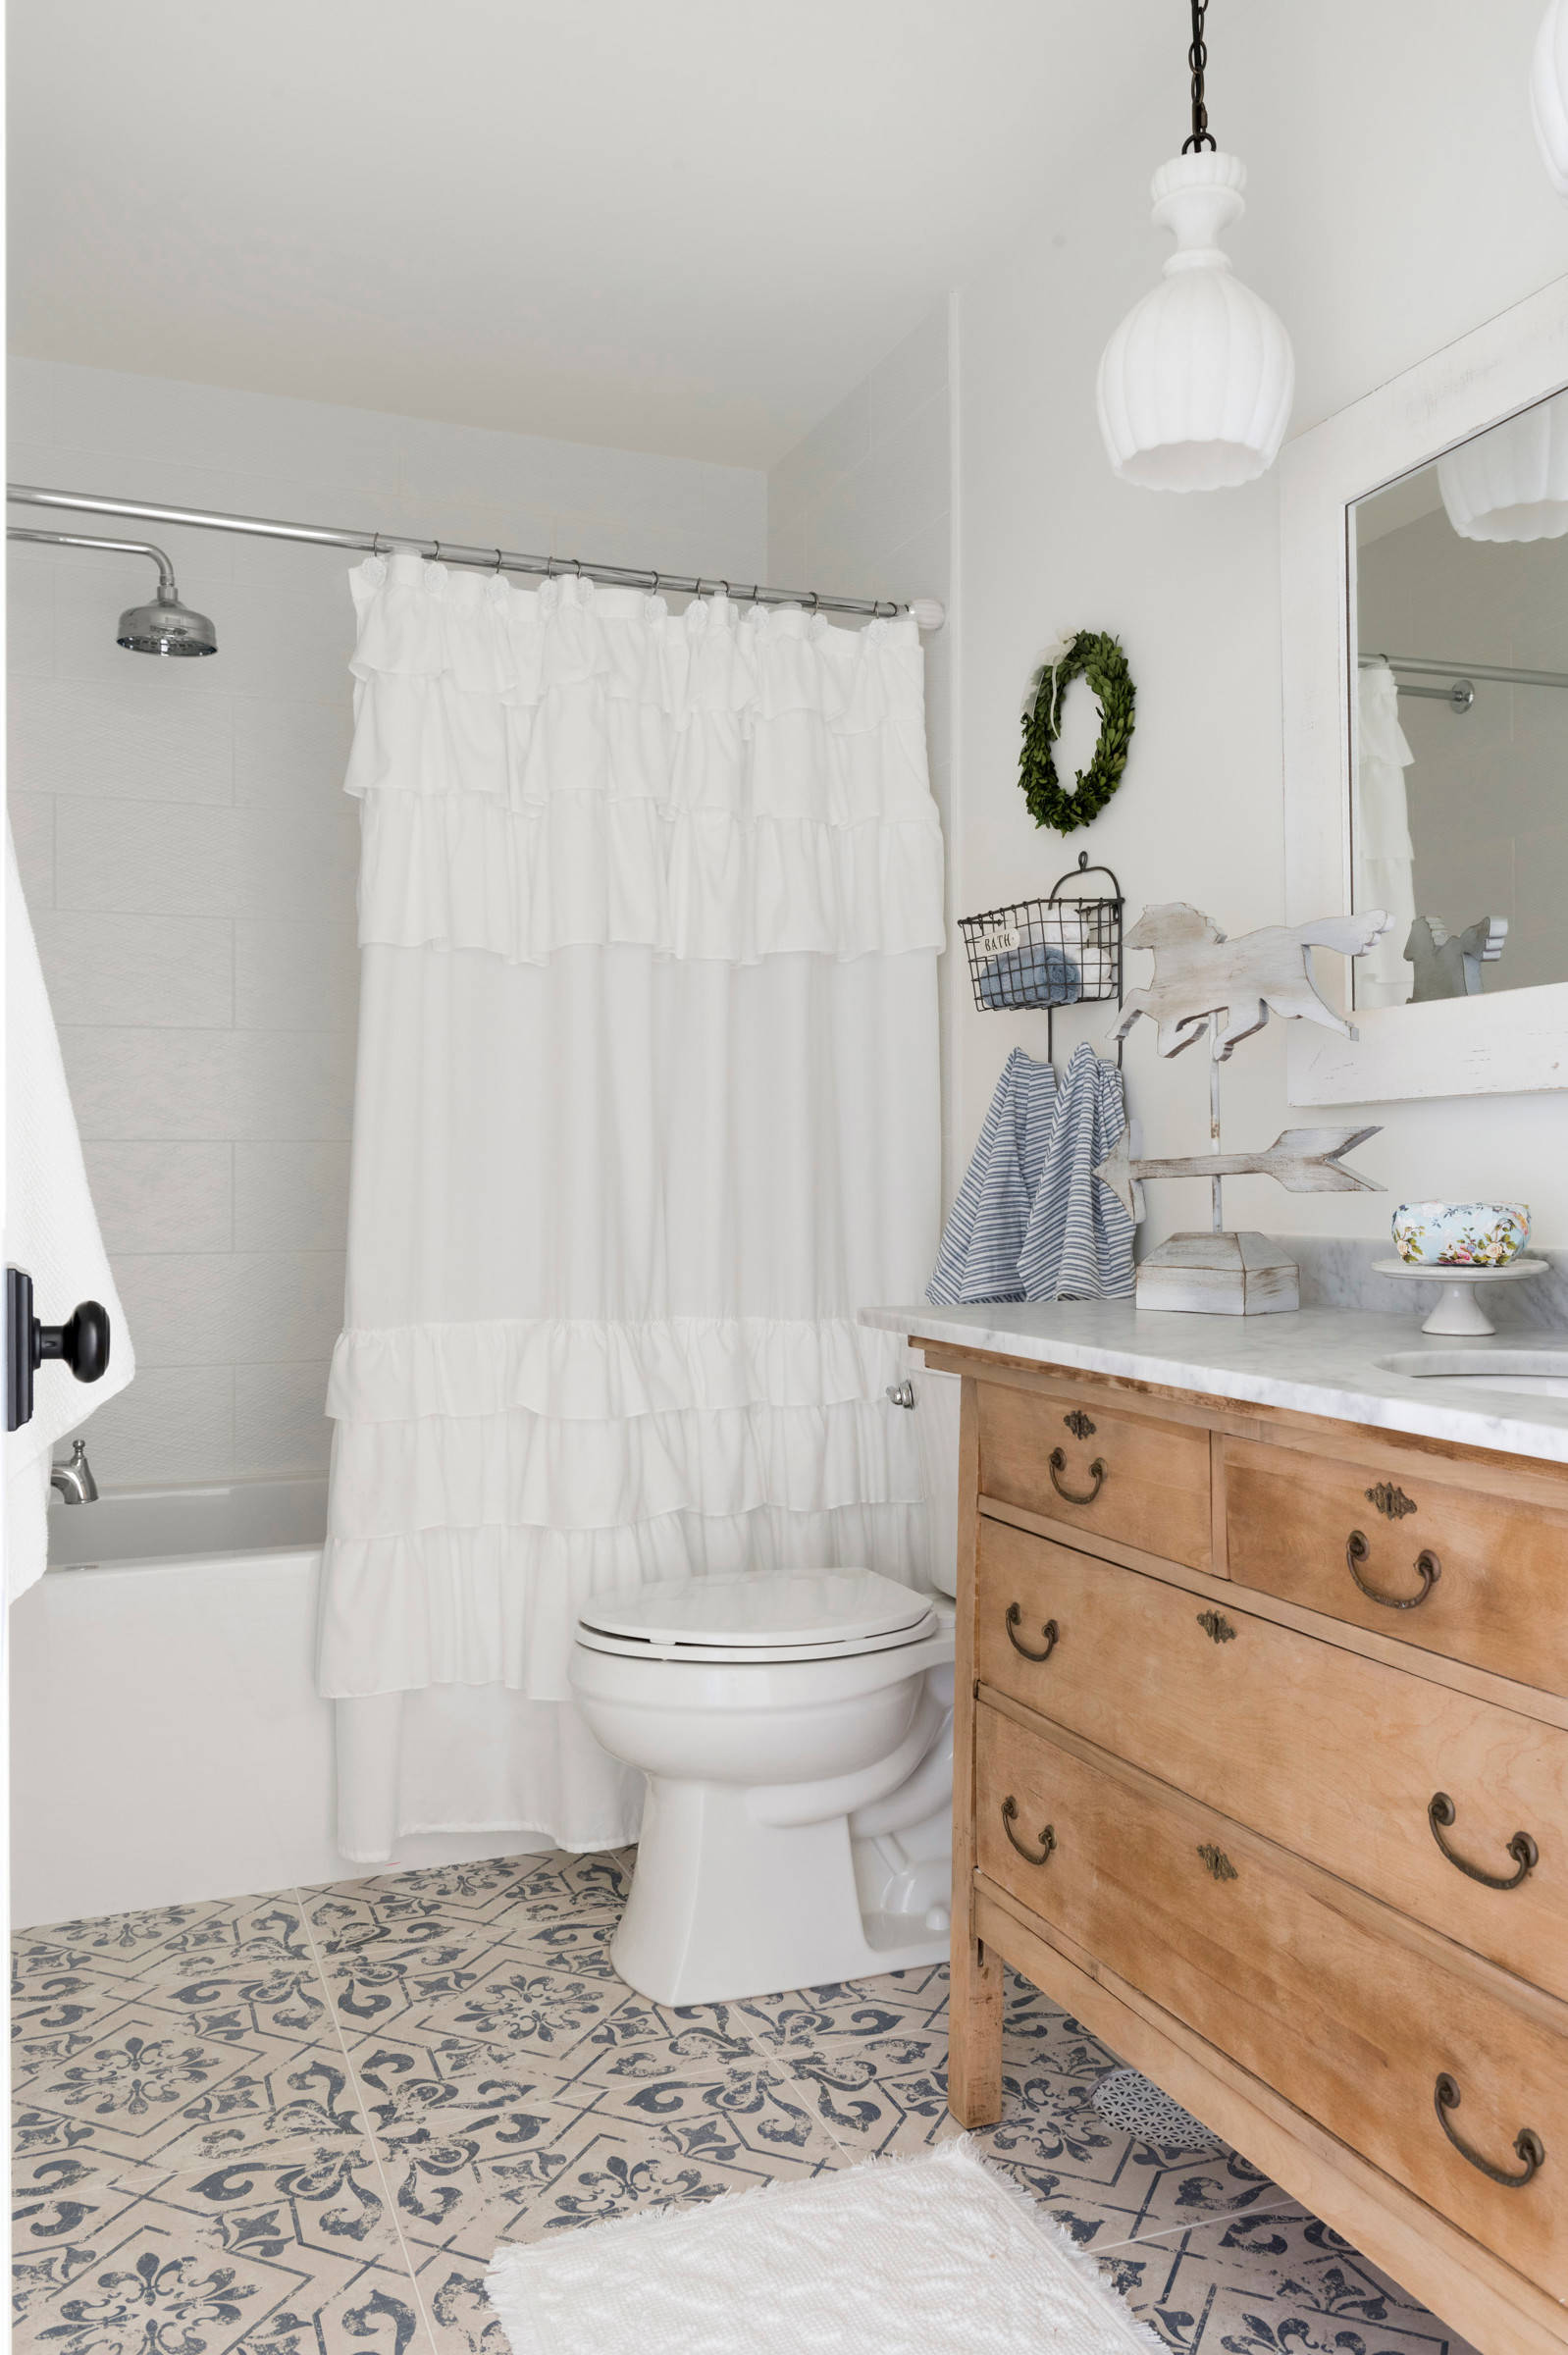 bedroom in a traditional farmhouse style featuring a vintage sink featured in home tour